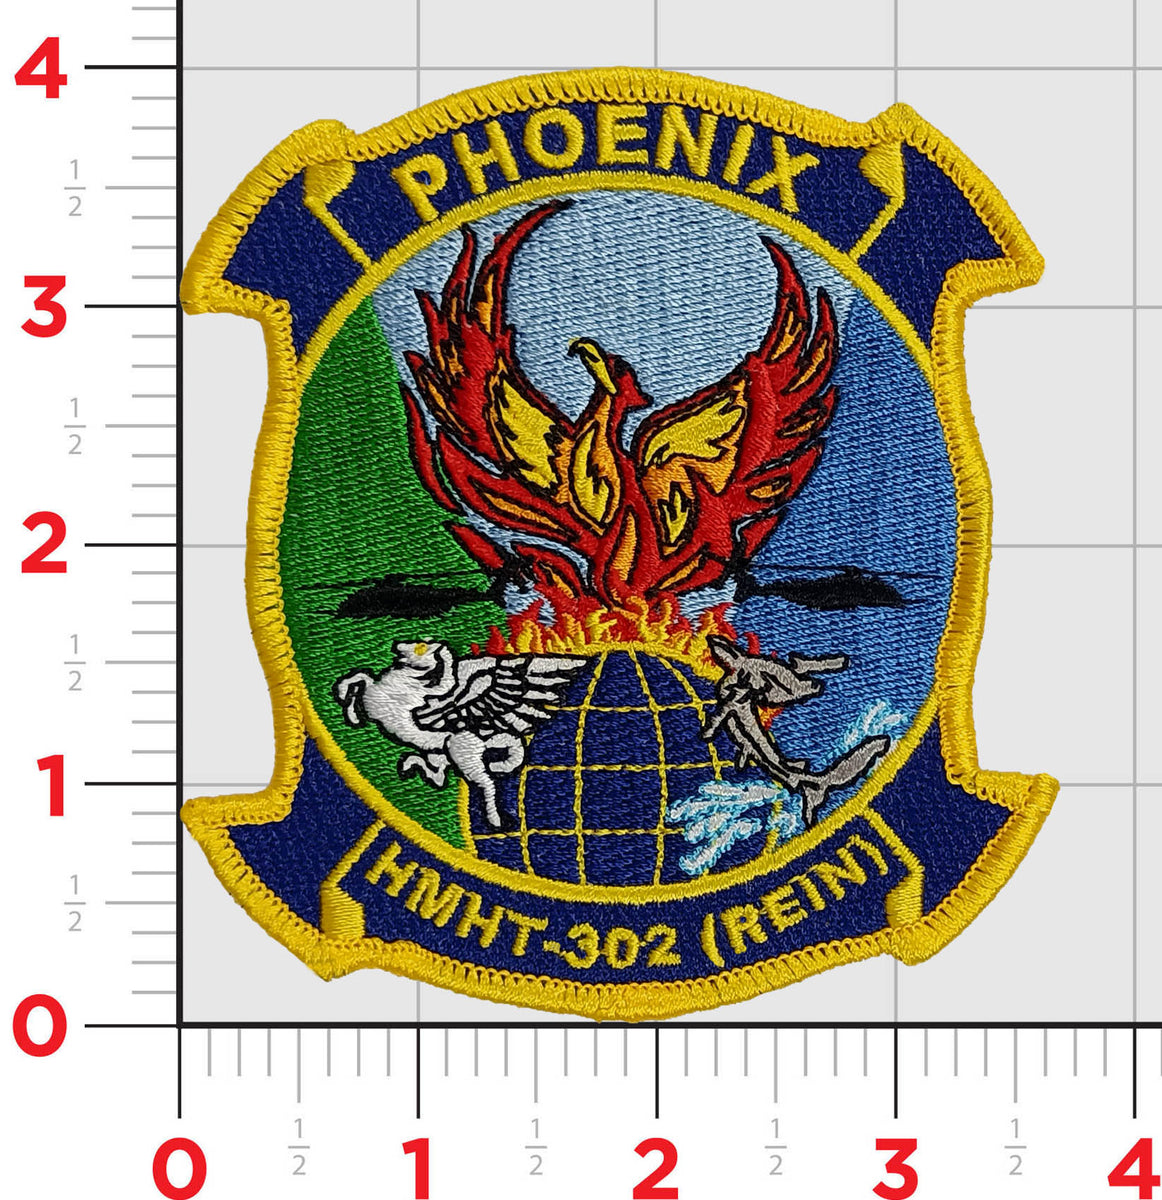 Official HMHT-302 (REIN) Squadron Patch – MarinePatches.com - Custom ...